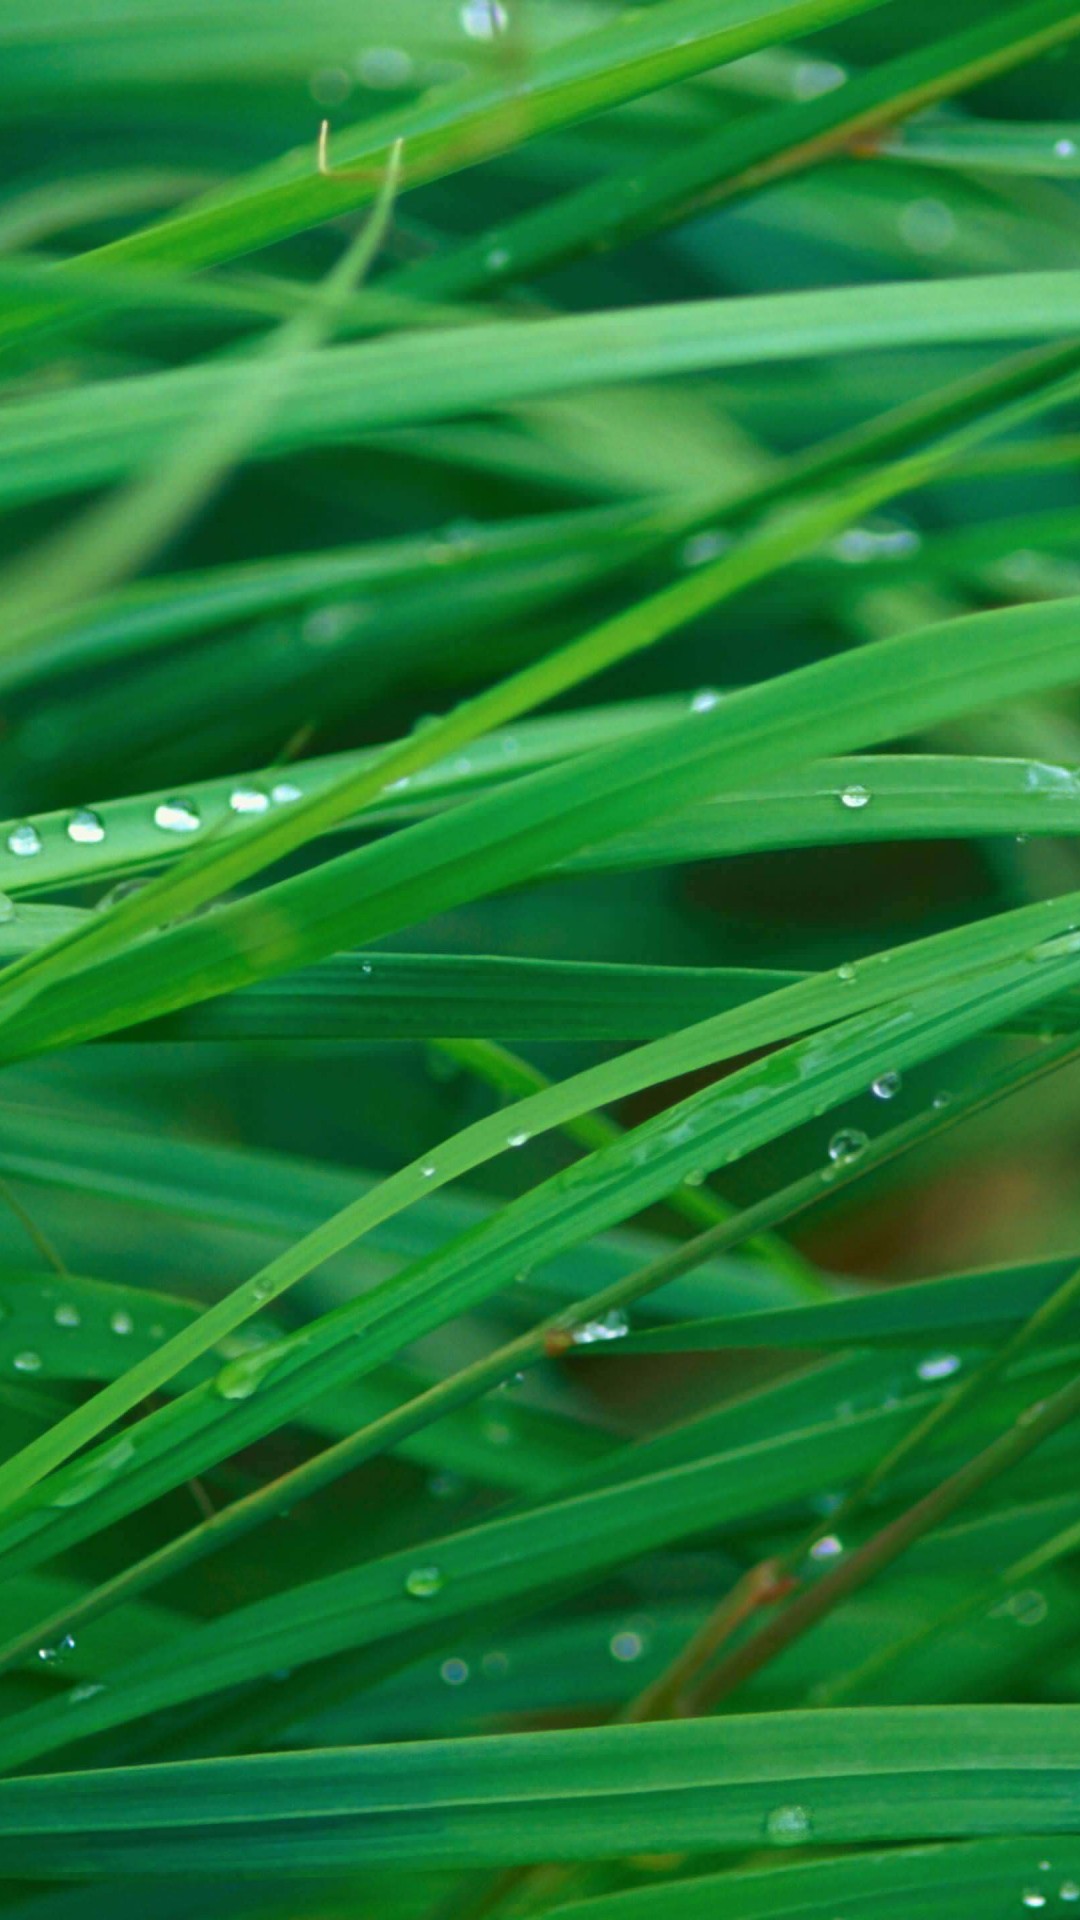 Green Blades Of Grass Wallpaper for SONY Xperia Z3